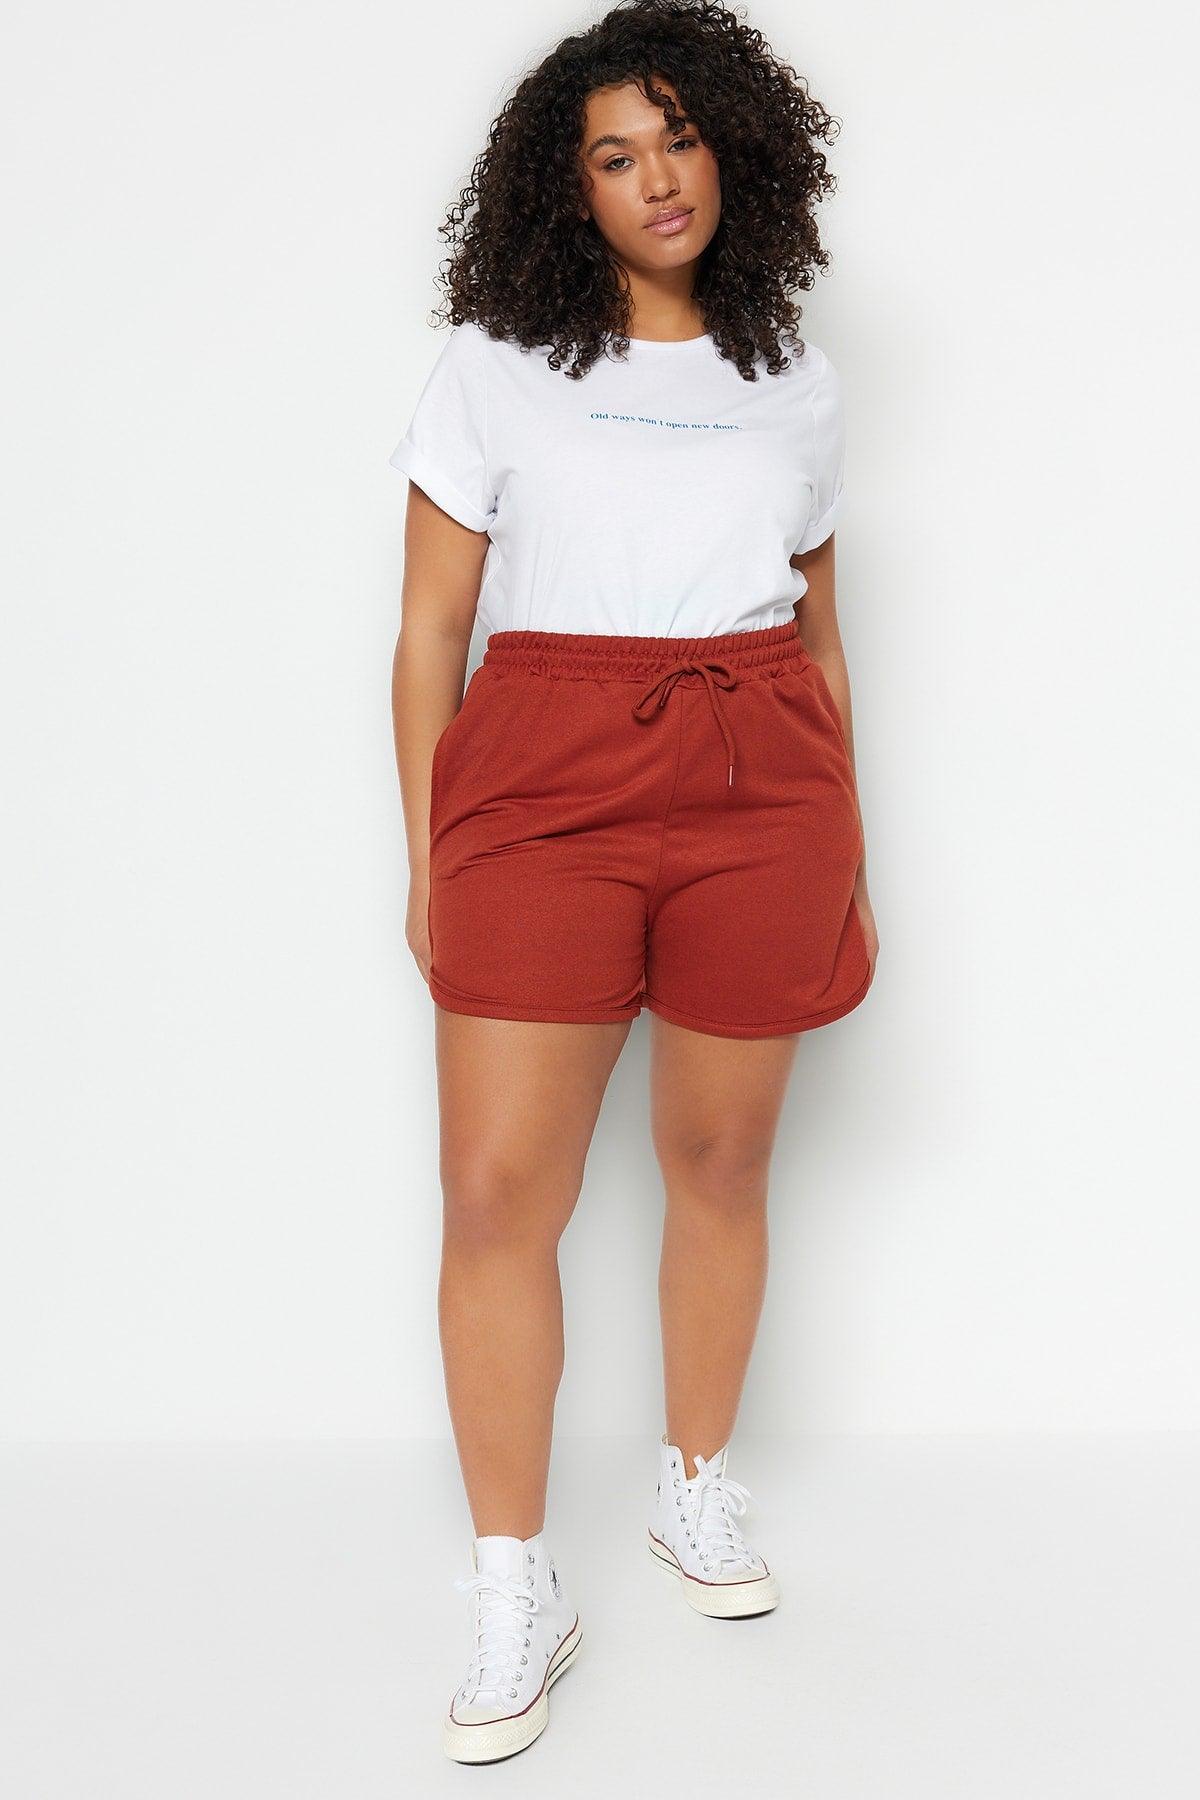 Brown Thin Knitted Shorts TBBSS23AP00002 - Swordslife